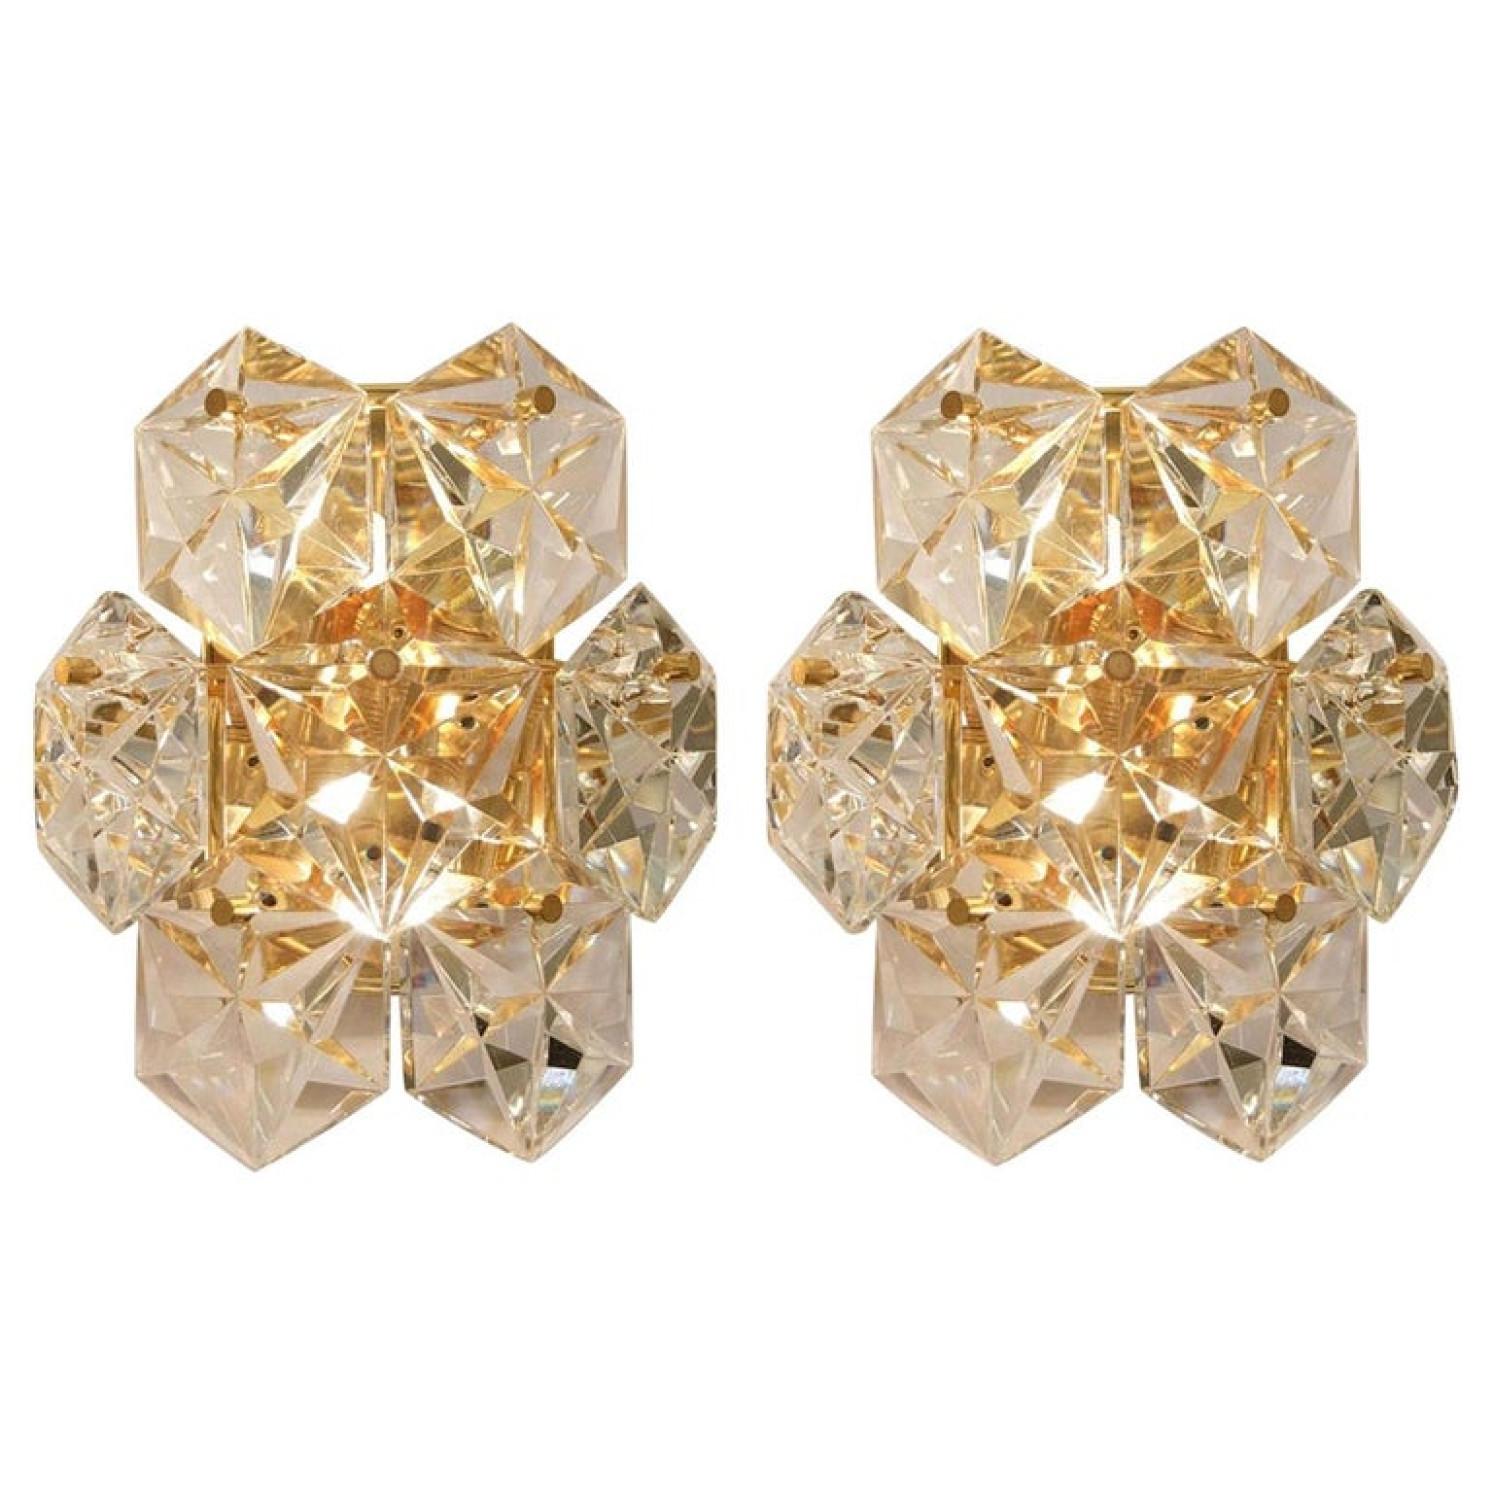 Mid-Century Modern 1 of the 6 Faceted Crystal and Gilt Sconces by Kinkeldey, Germany, 1970s For Sale